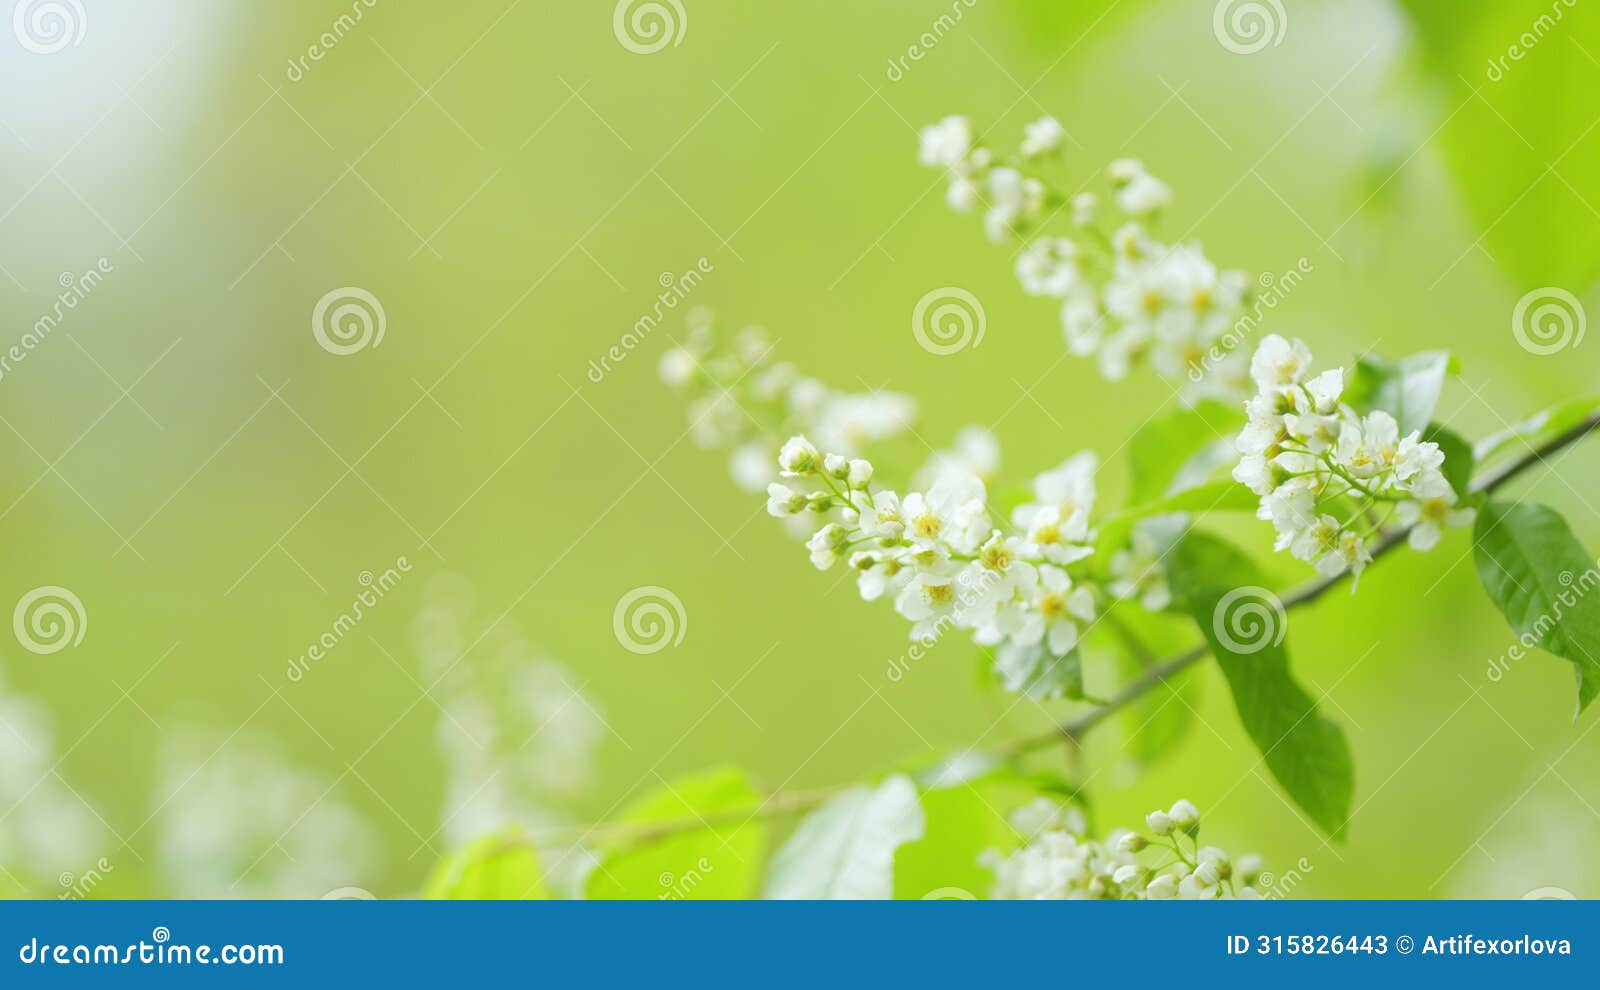 mayday tree, is a flowering plant in the rose family rosaceae. mass flowering. slow motion.